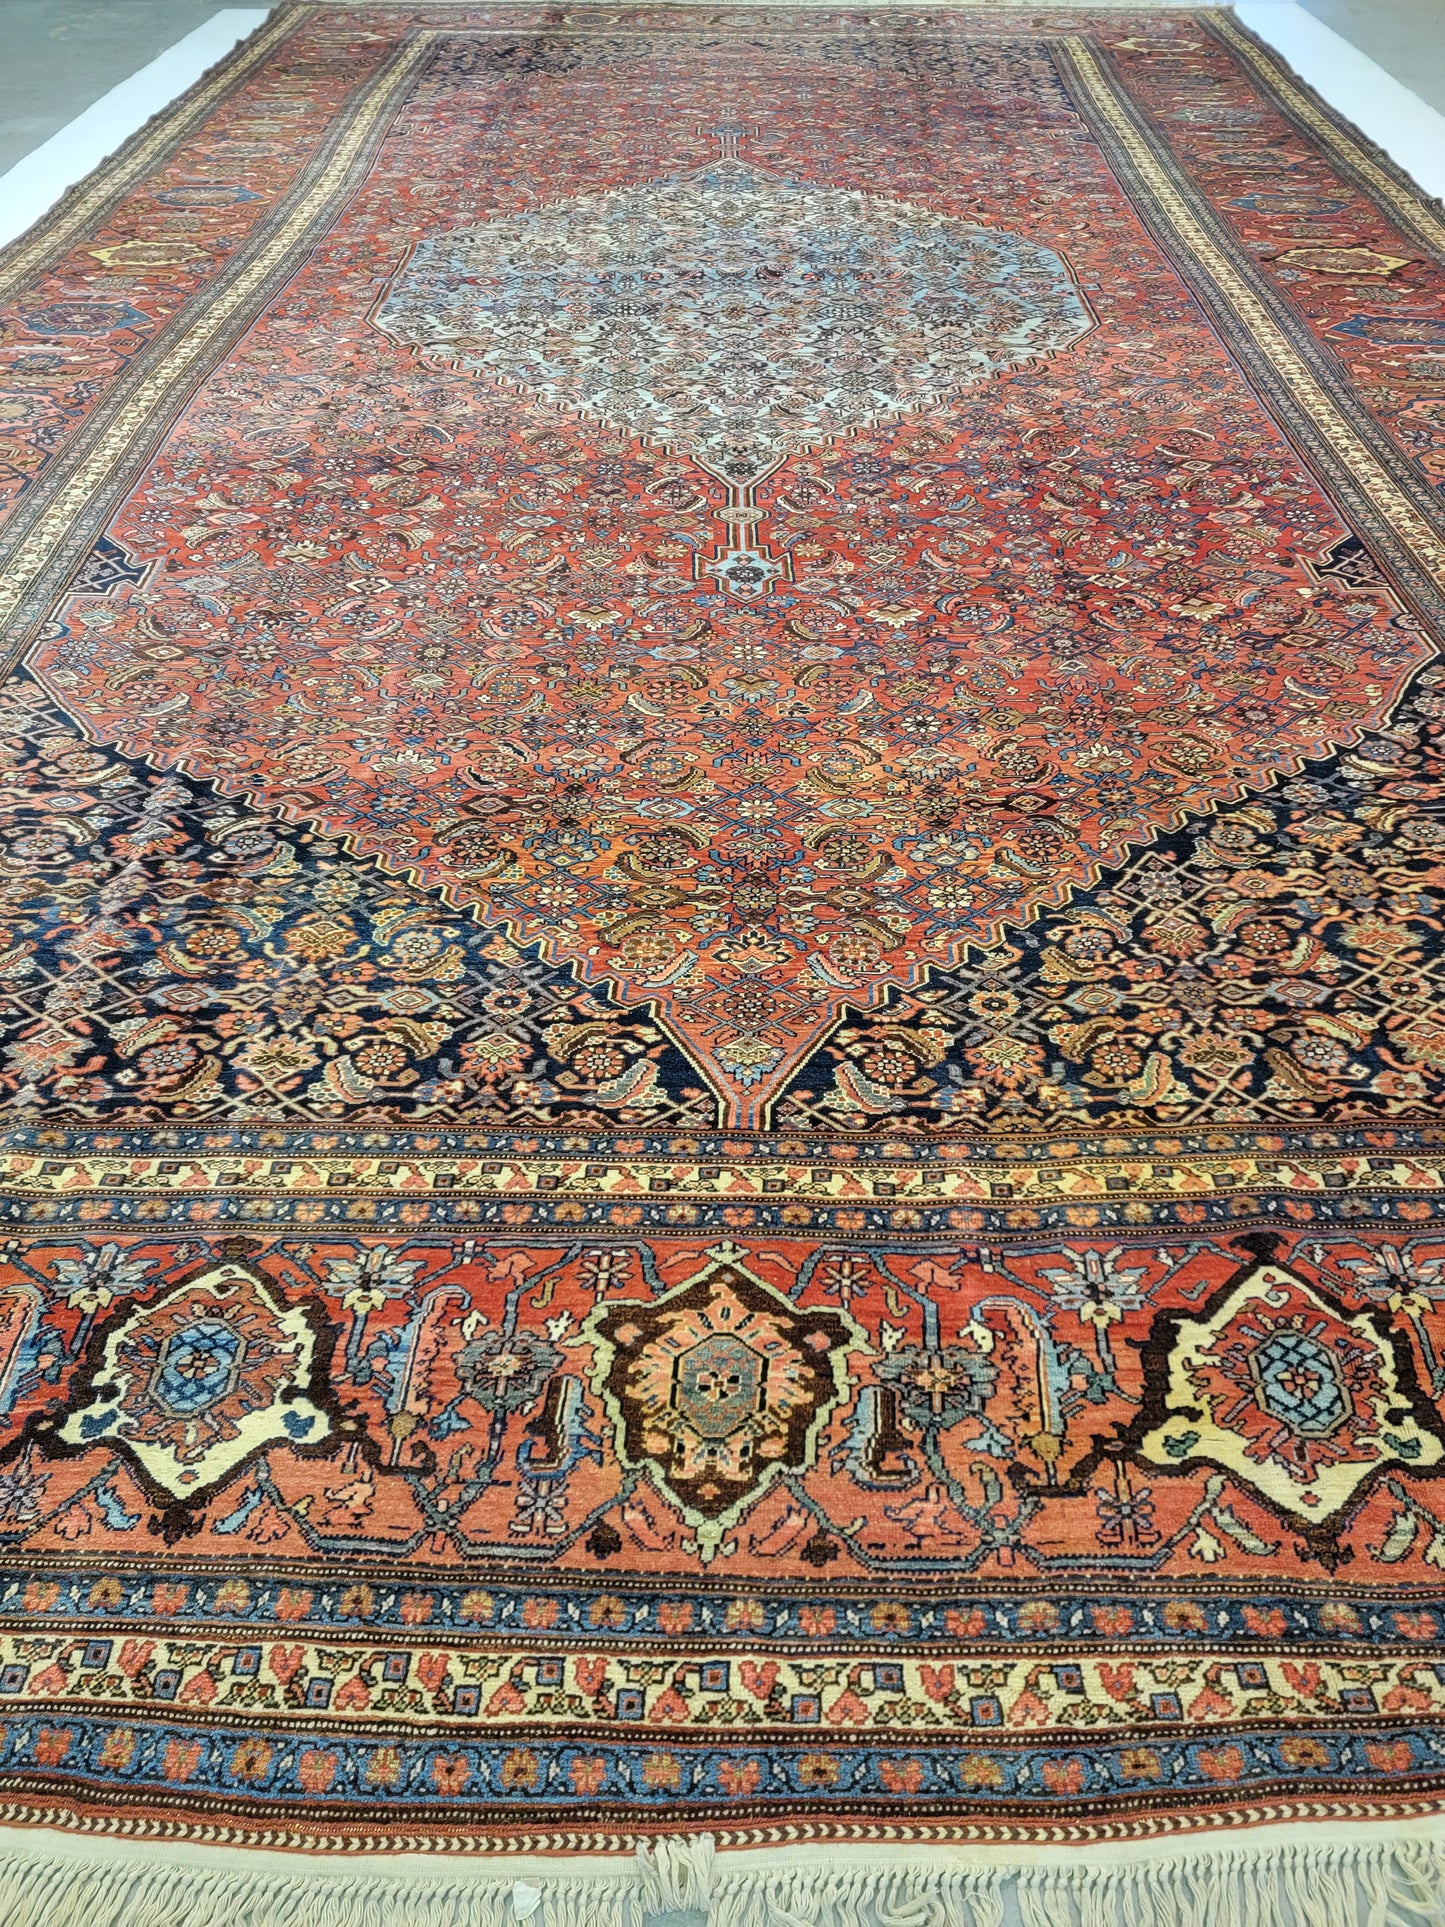 Antique Hand-Knotted Wool Area Rug Bijar Collectible 14'11" x 25'